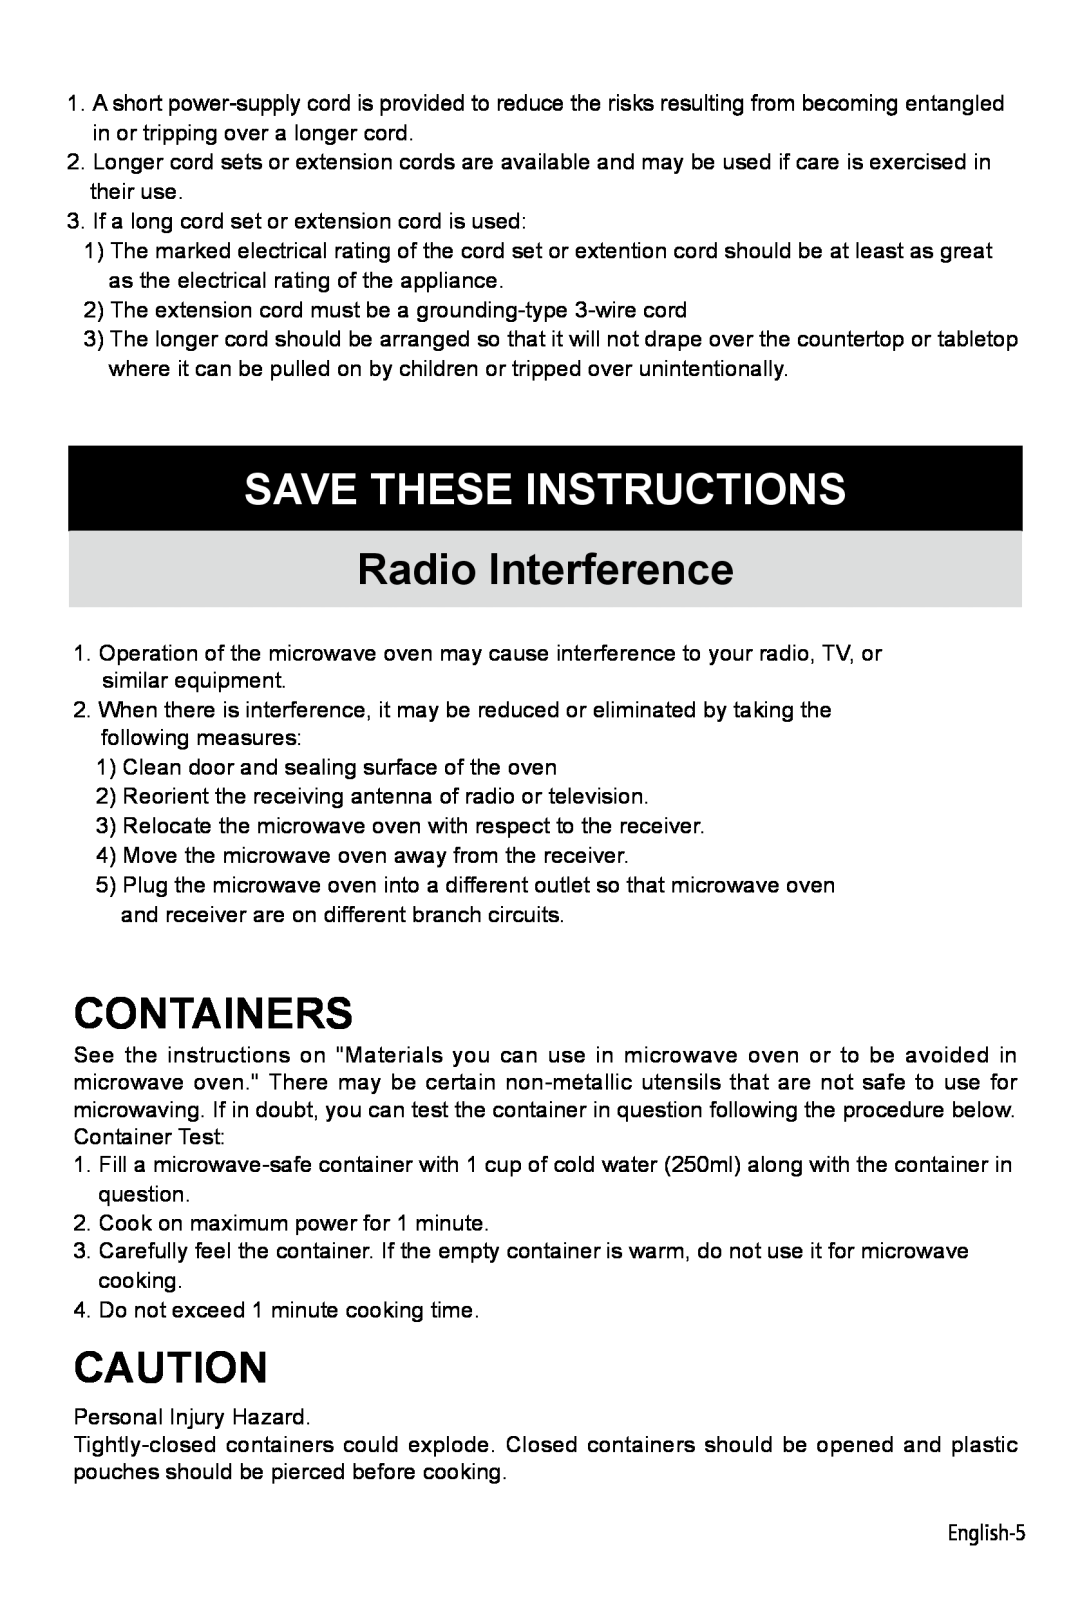 West Bend NJ 07054 instruction manual Save These Instructions, Radio Interference, Containers 